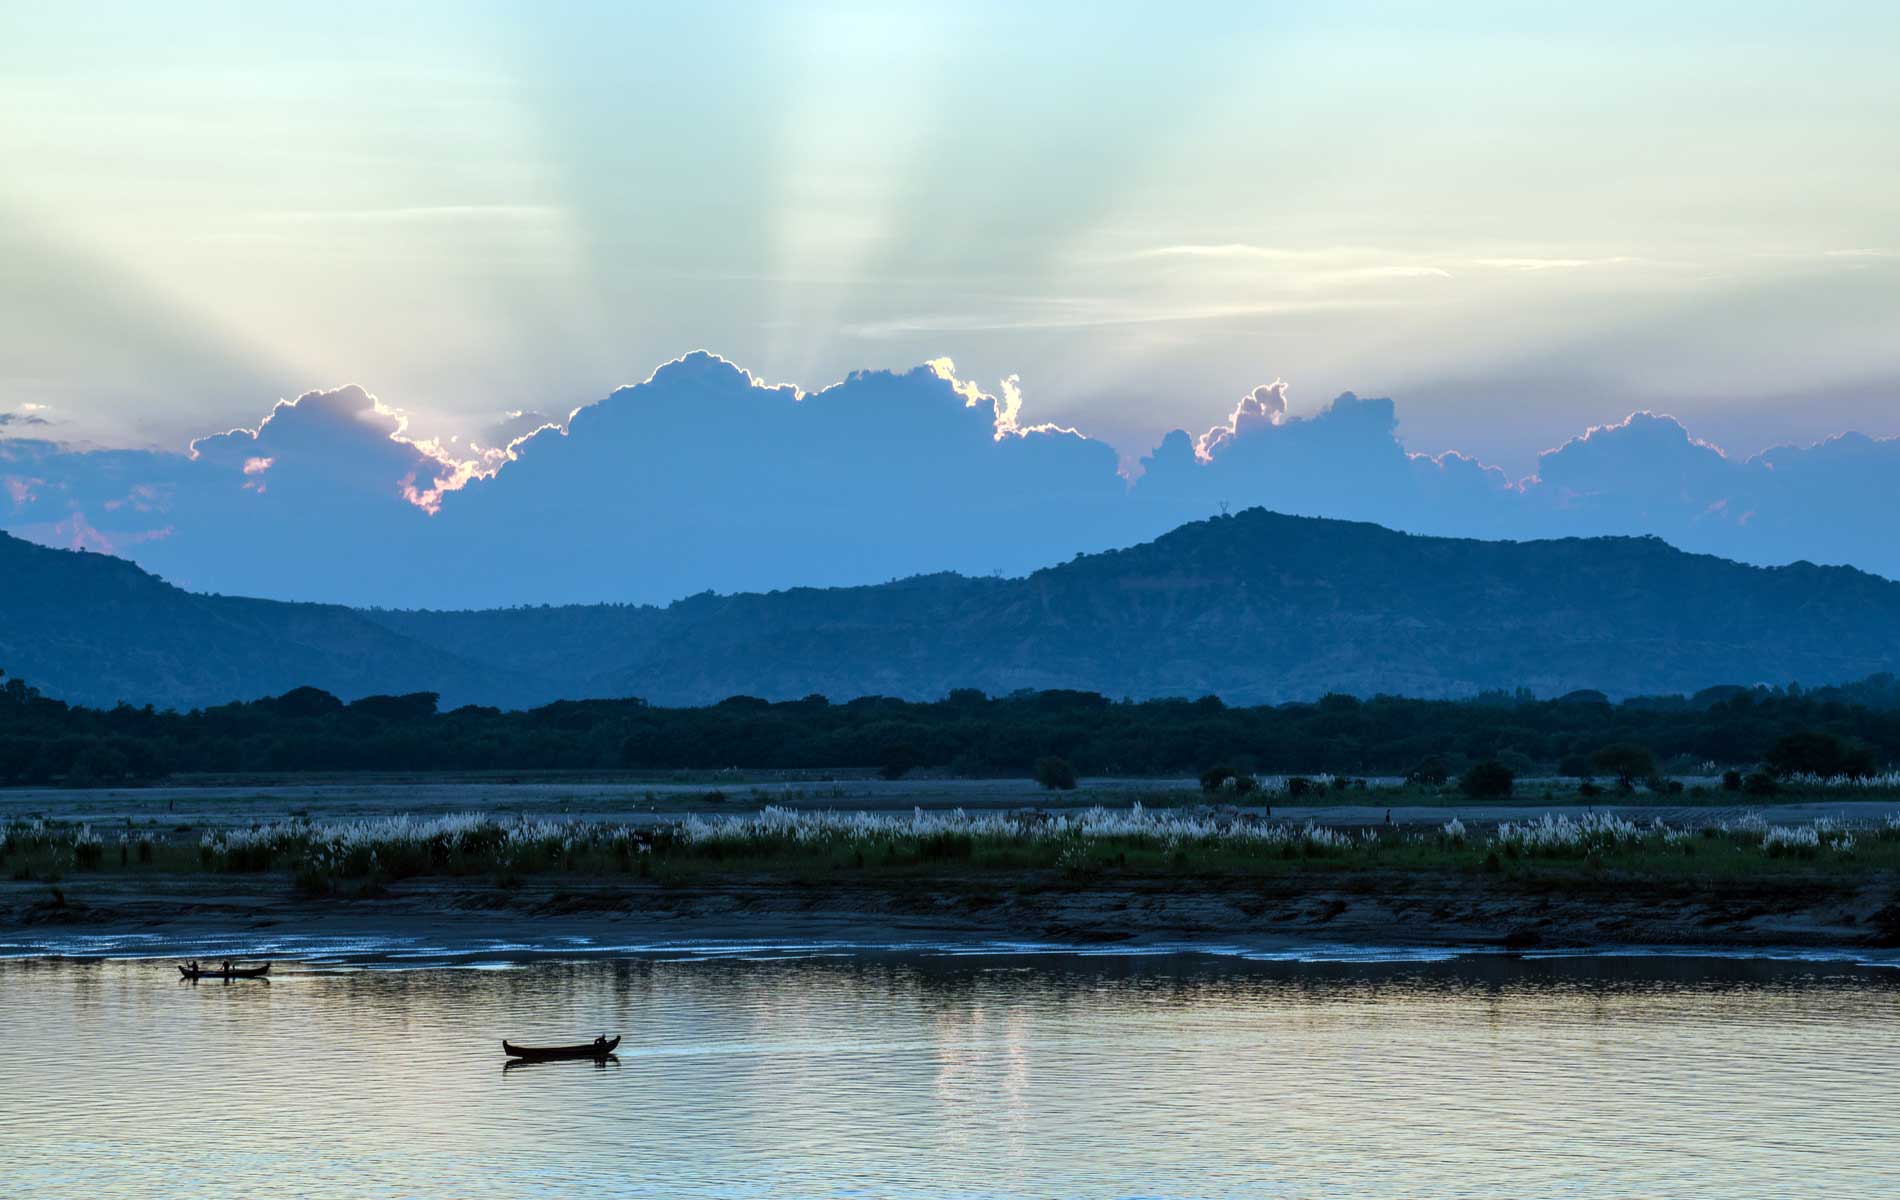 The Irrawaddy River in Myanmar